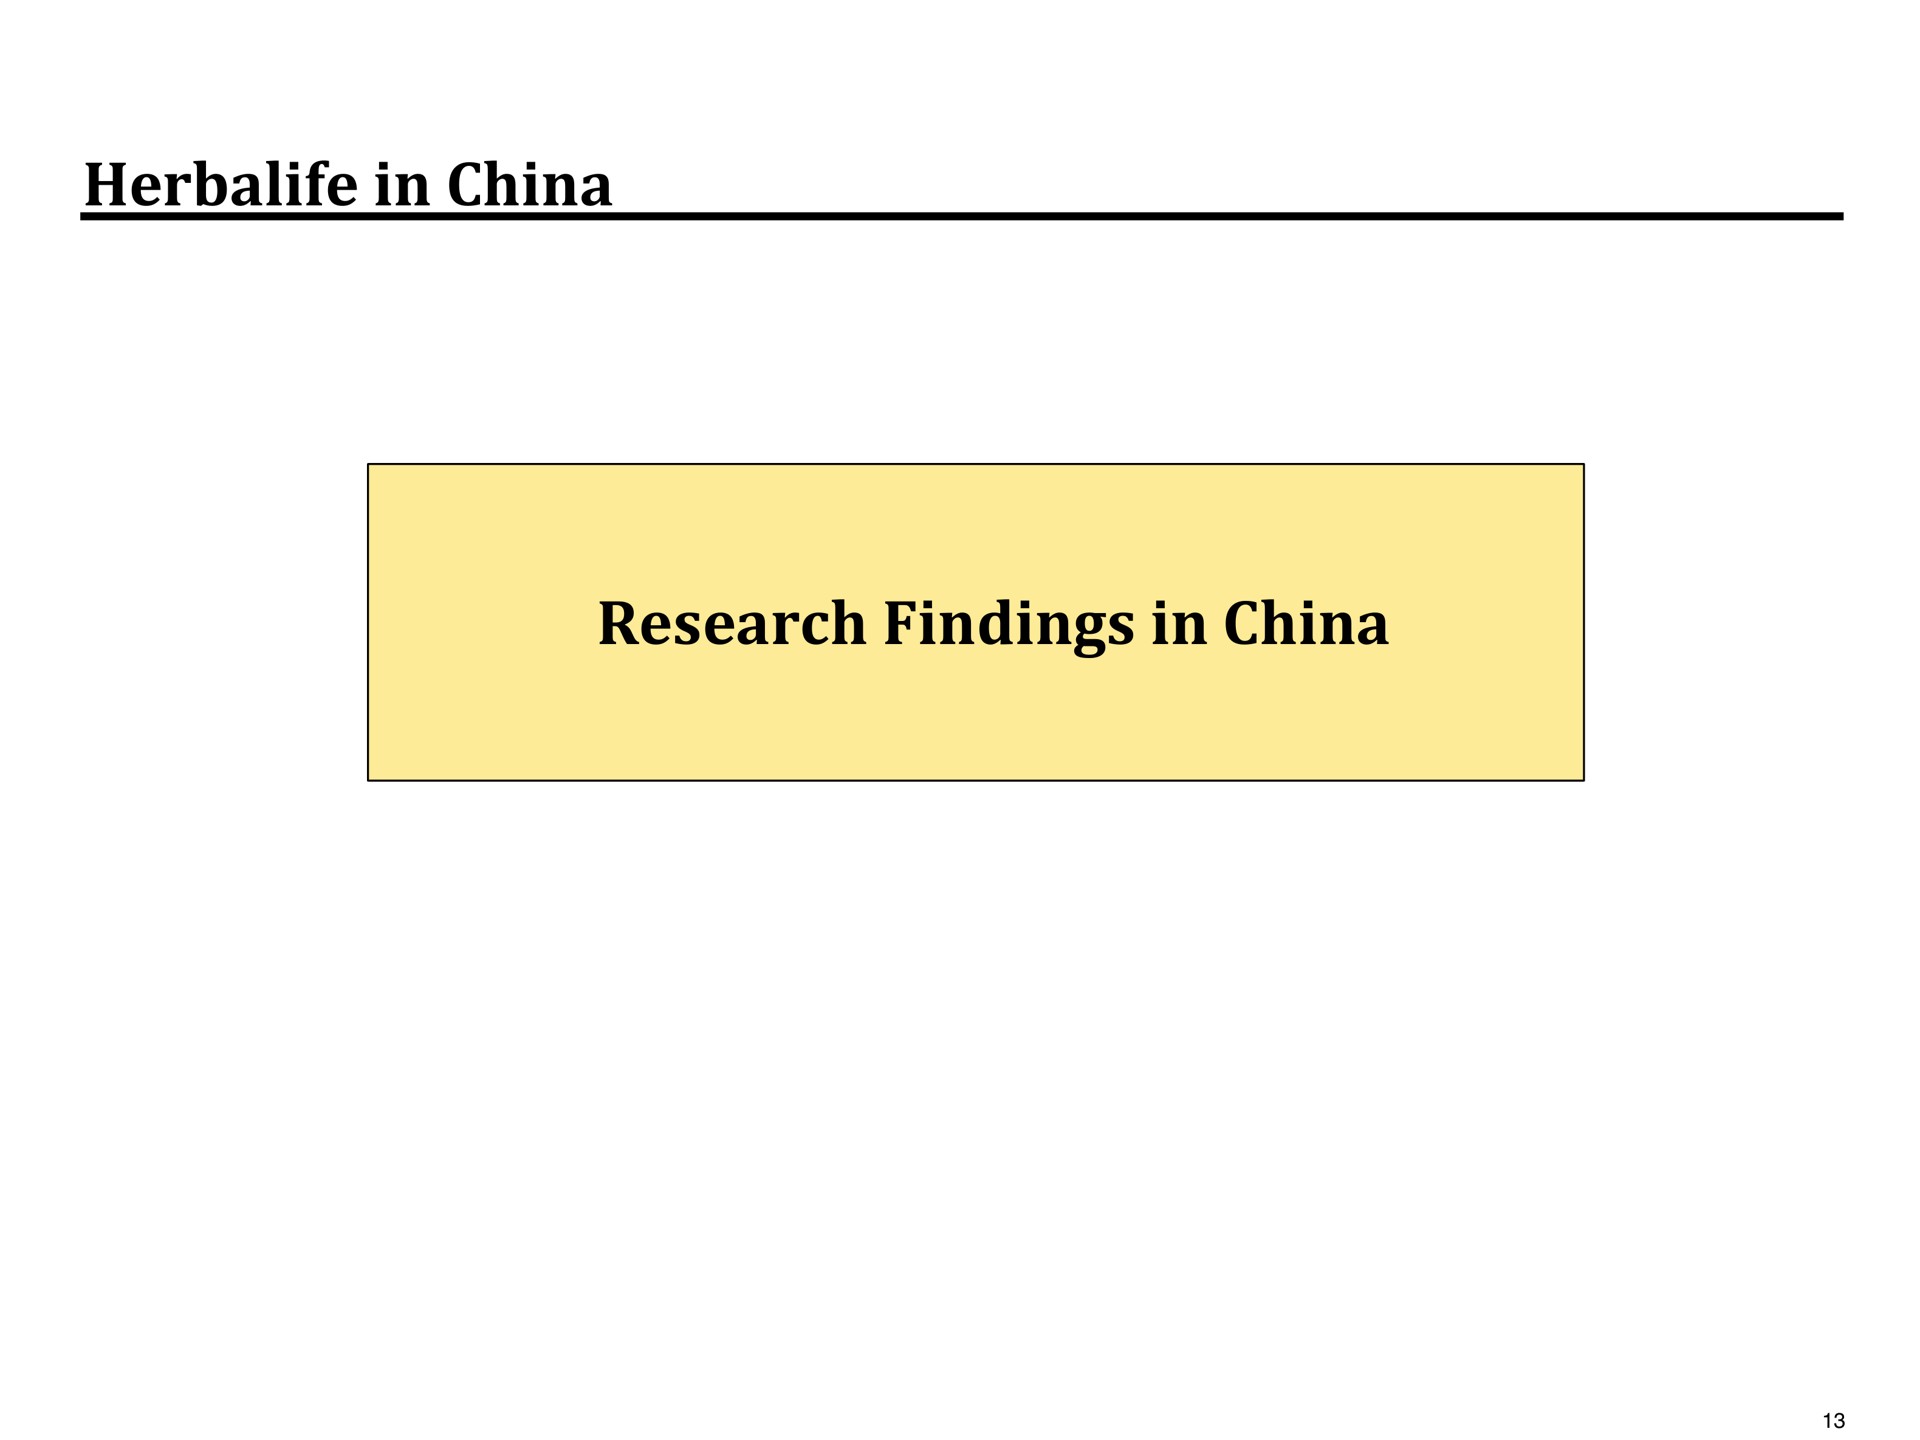 in china research findings in china | Pershing Square